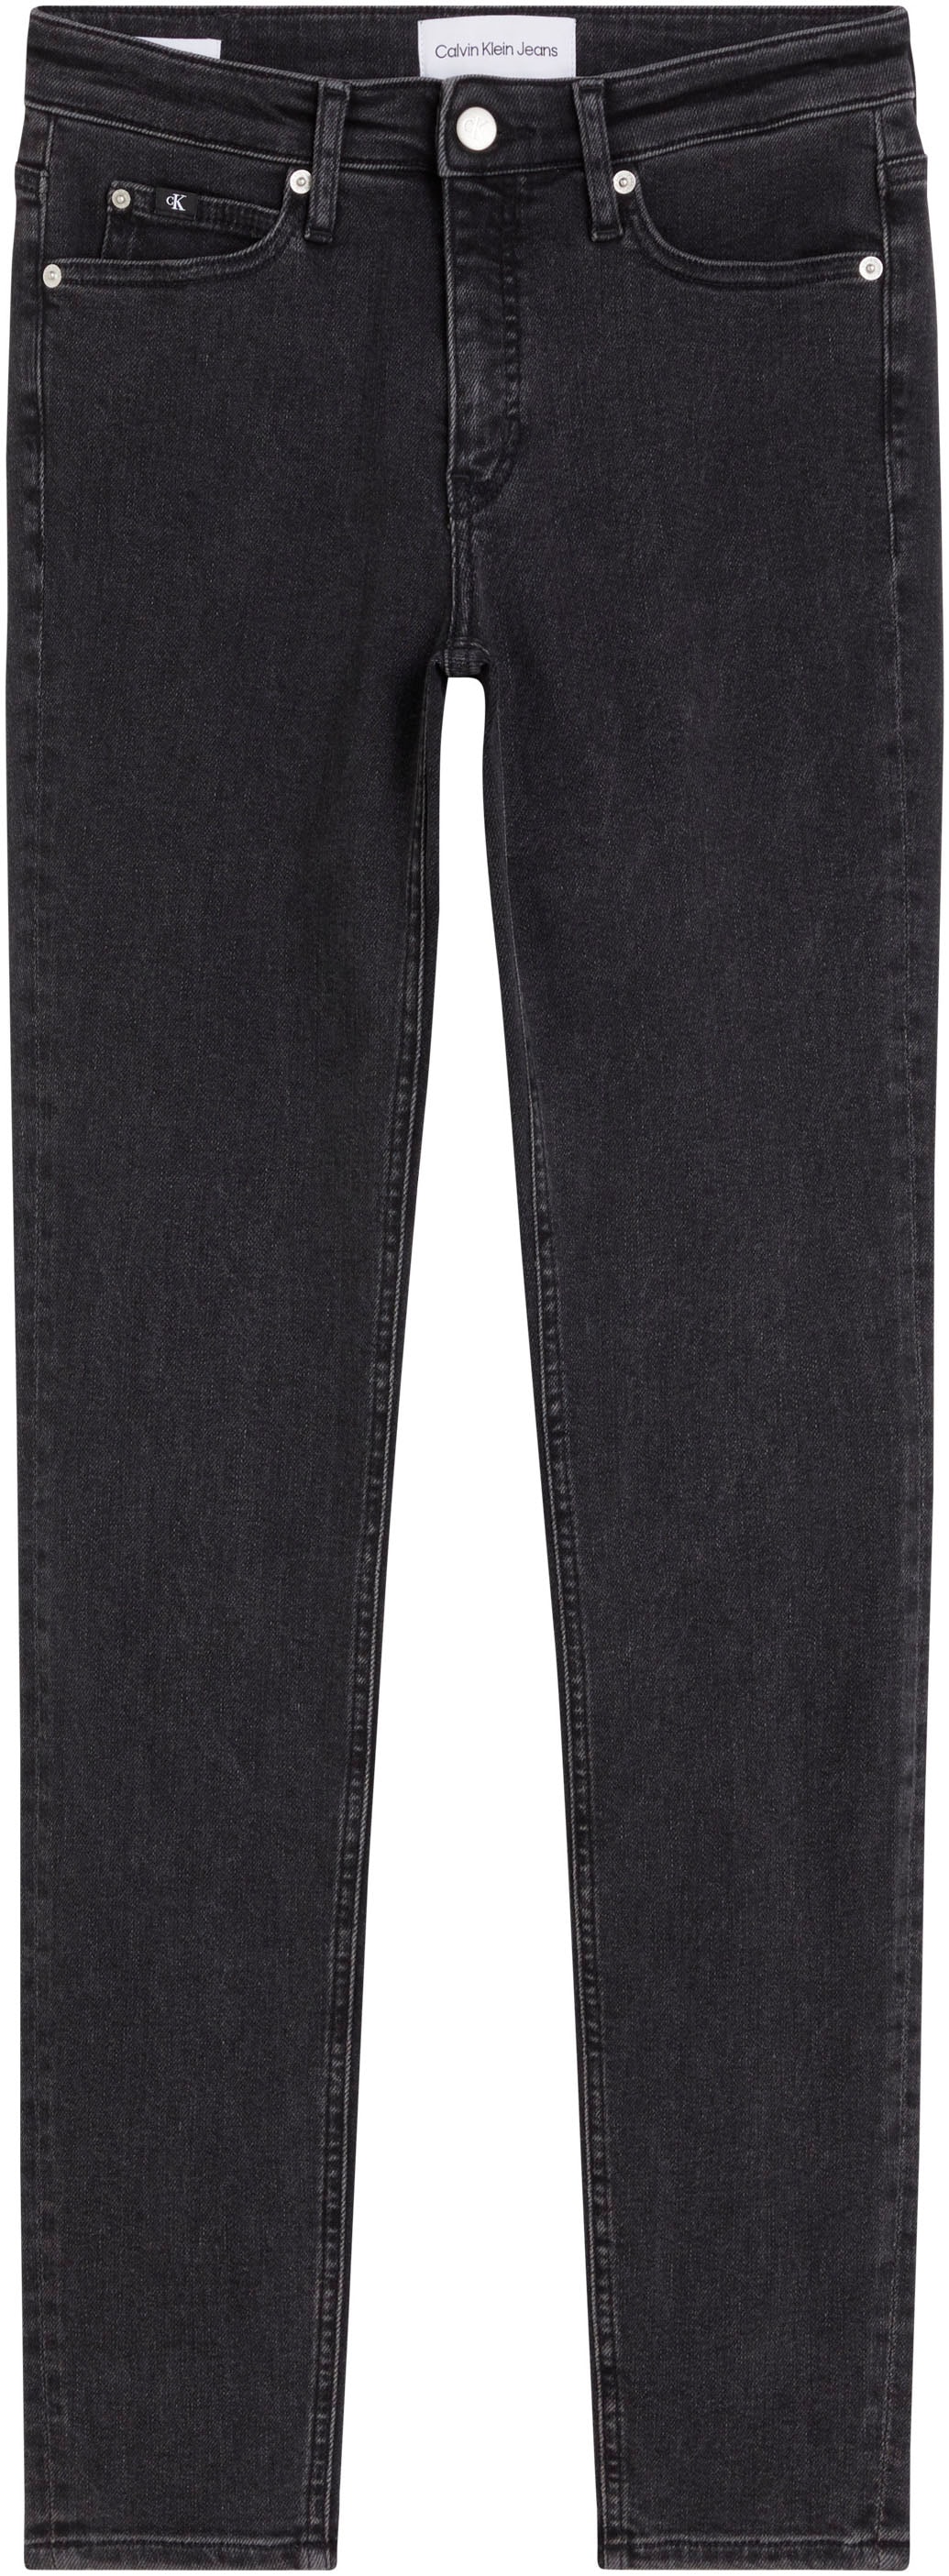 Calvin Klein Jeans Skinny-fit-Jeans »MID RISE SKINNY« von Calvin Klein Jeans